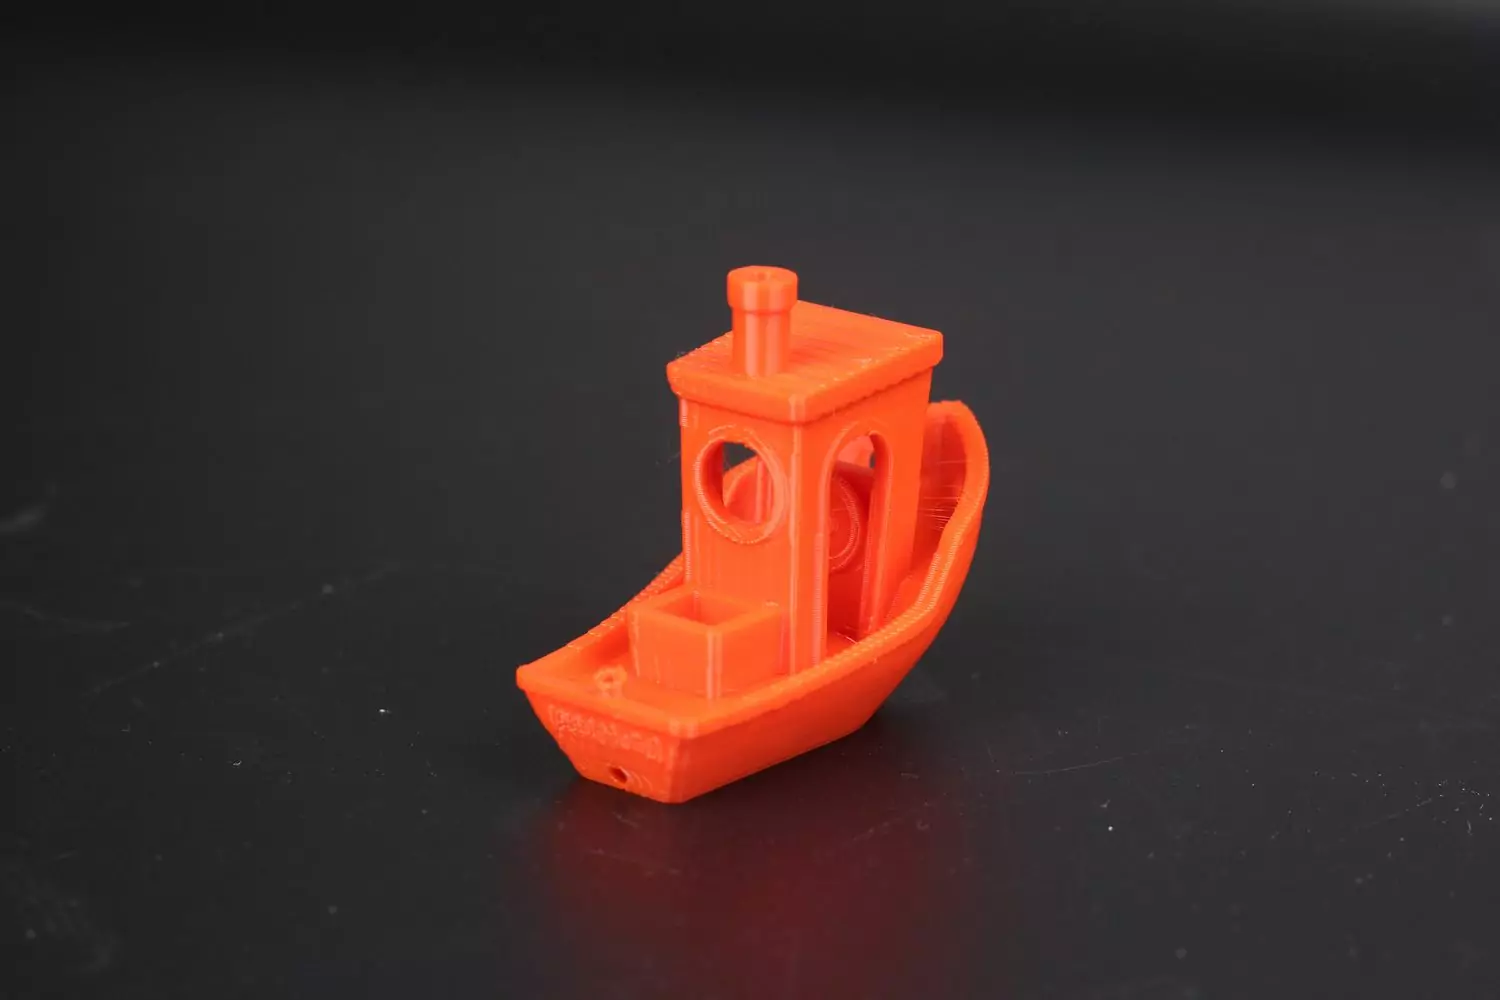 3D benchy printed on Ender 3 S1 Pro with Klipper and Sonic Pad4 | Creality Sonic Pad Review: Klipper Firmware with Compromises